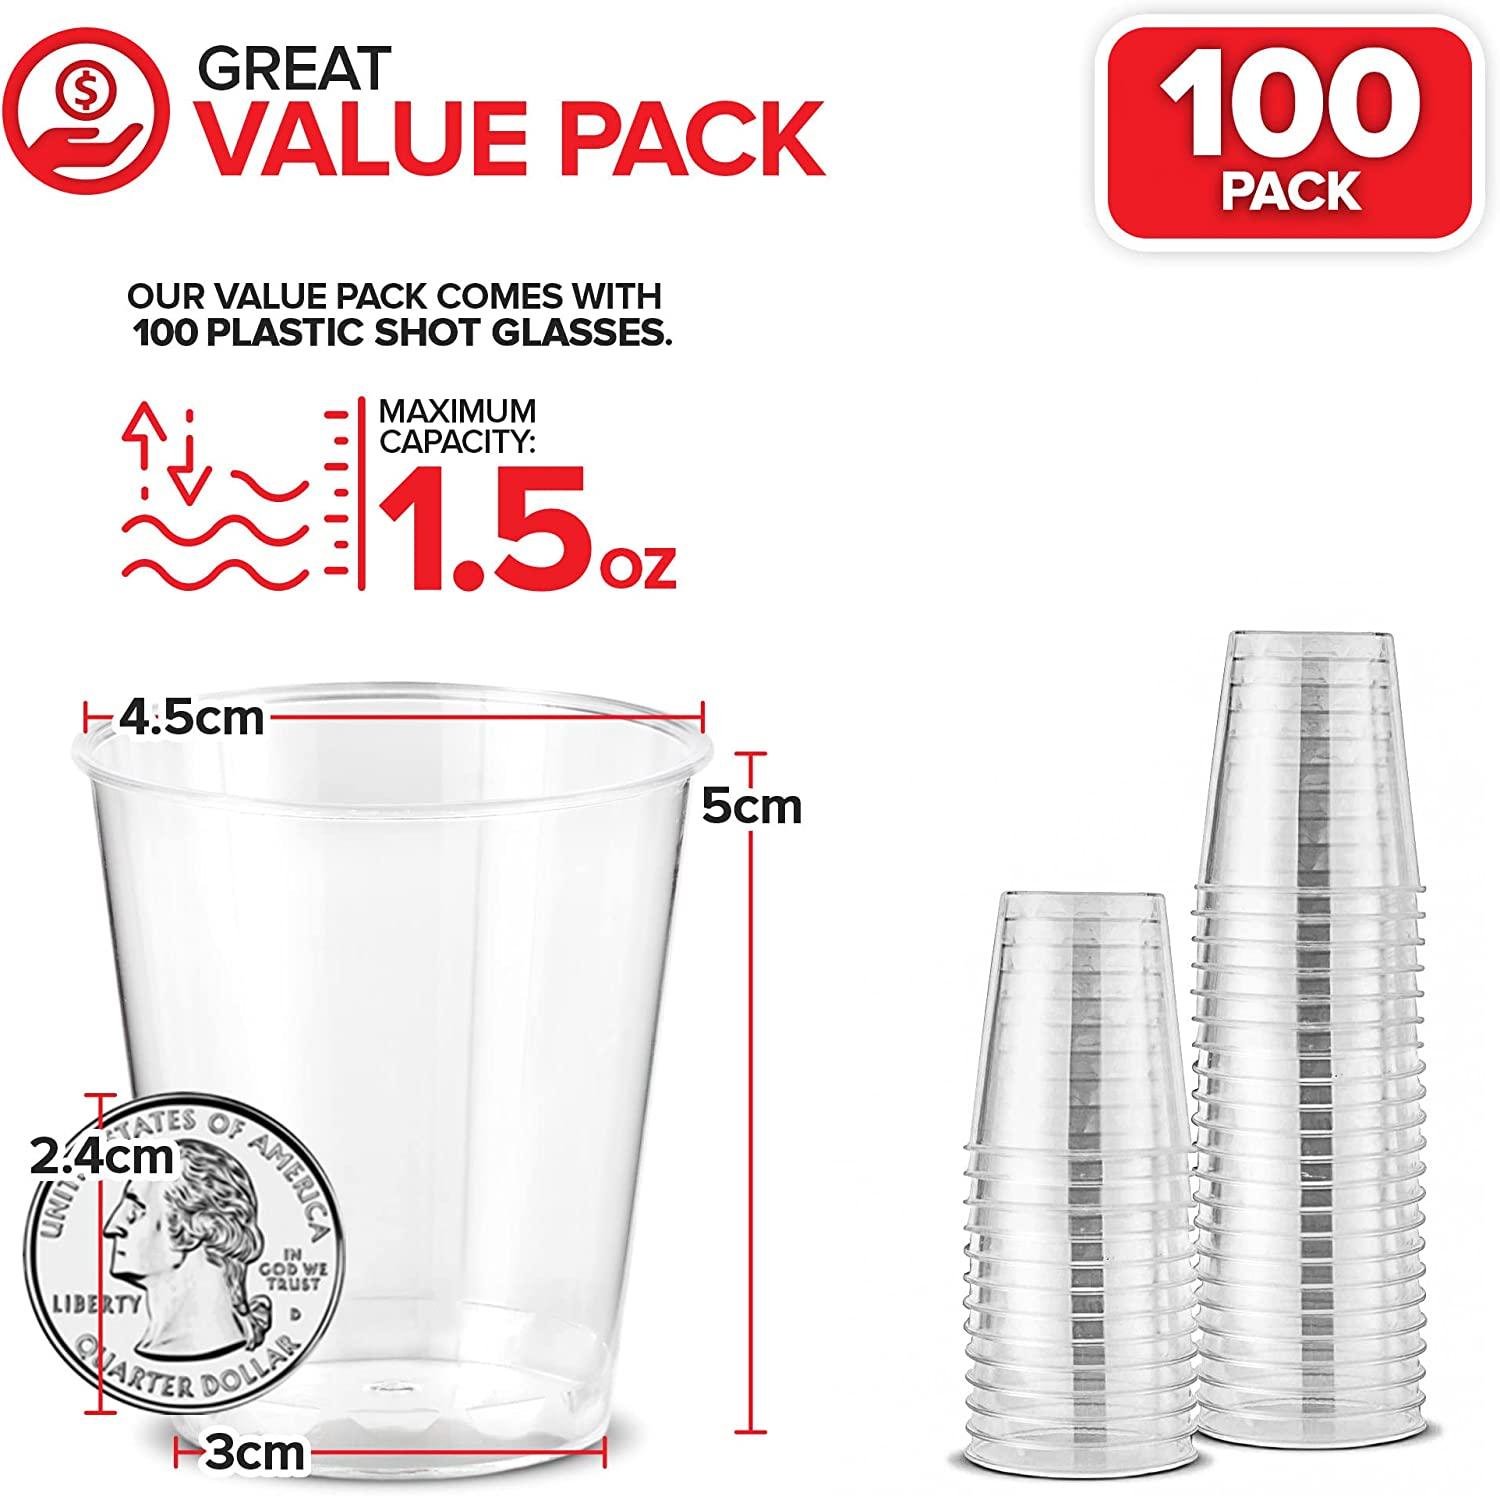 Graduated Disposable Measuring Cups - Small - Wonder Beauty Products